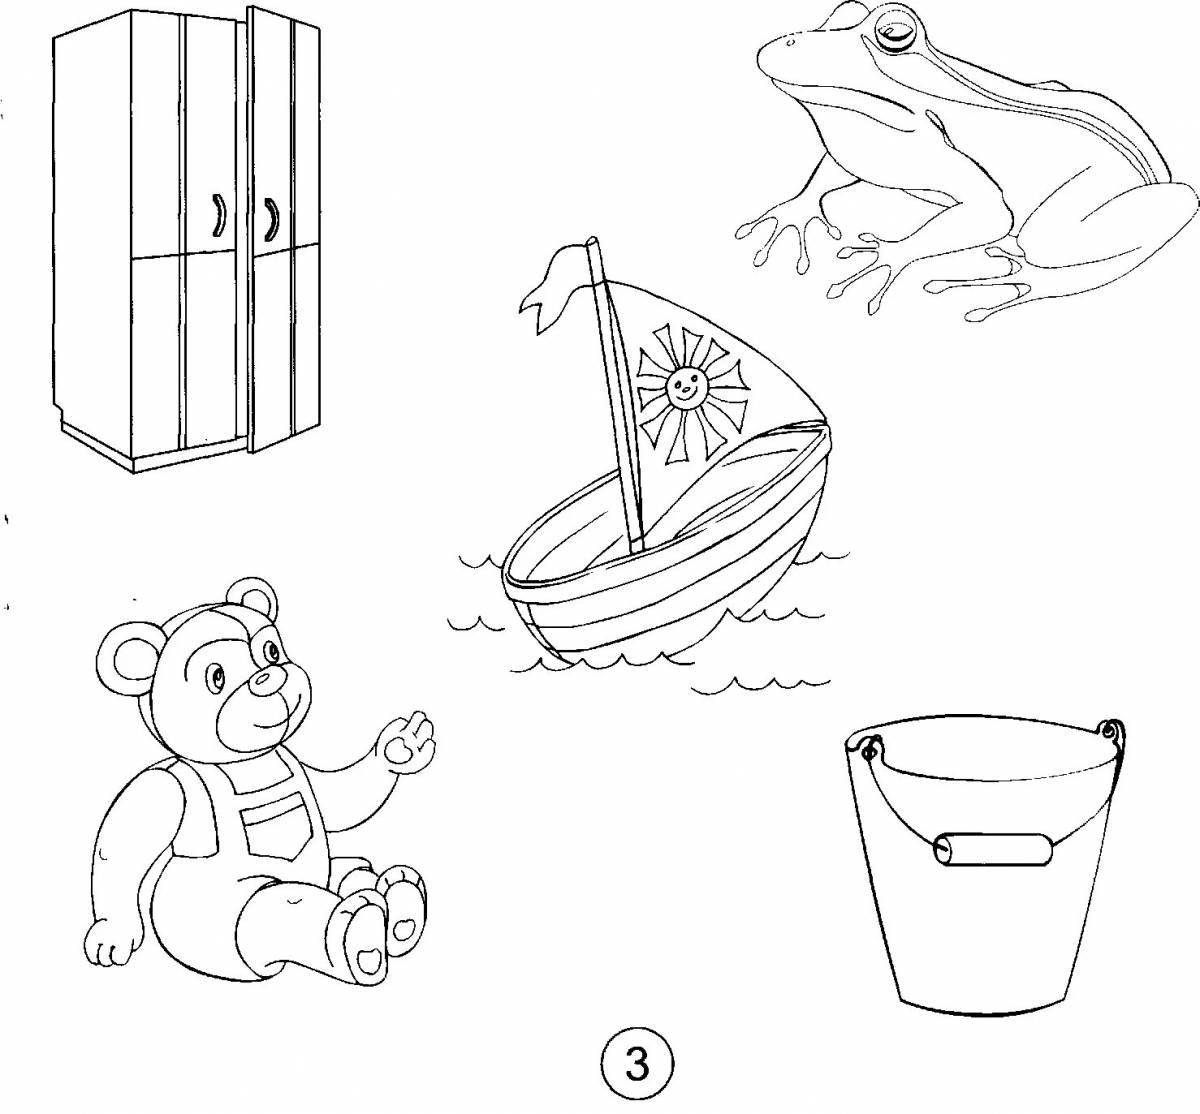 Entertaining coloring book-speech therapist for children 3-4 years old